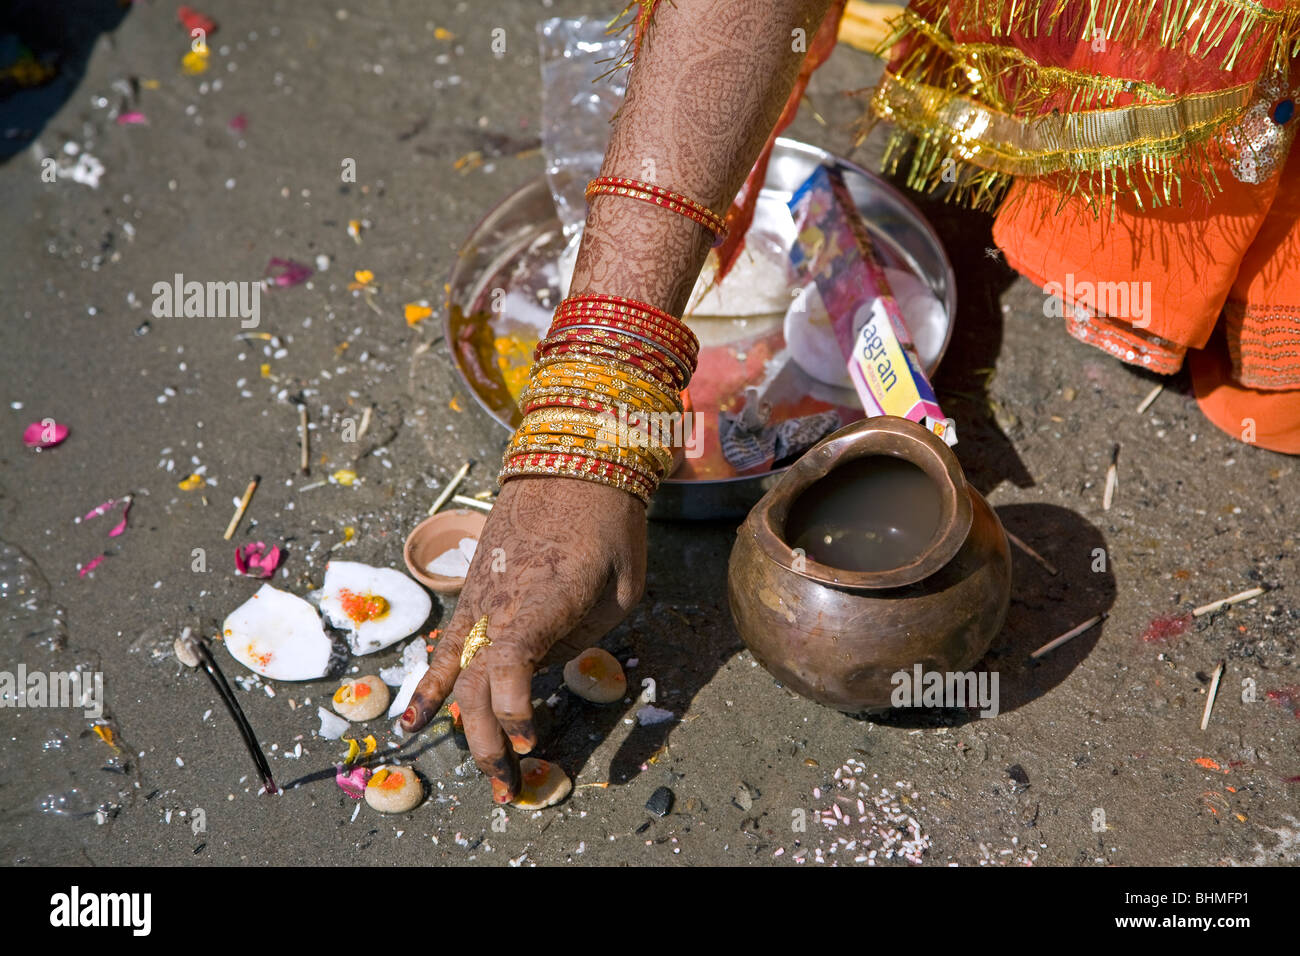 Indian bride making a puja (ritual offering). Ganges river. Allahabad. India Stock Photo